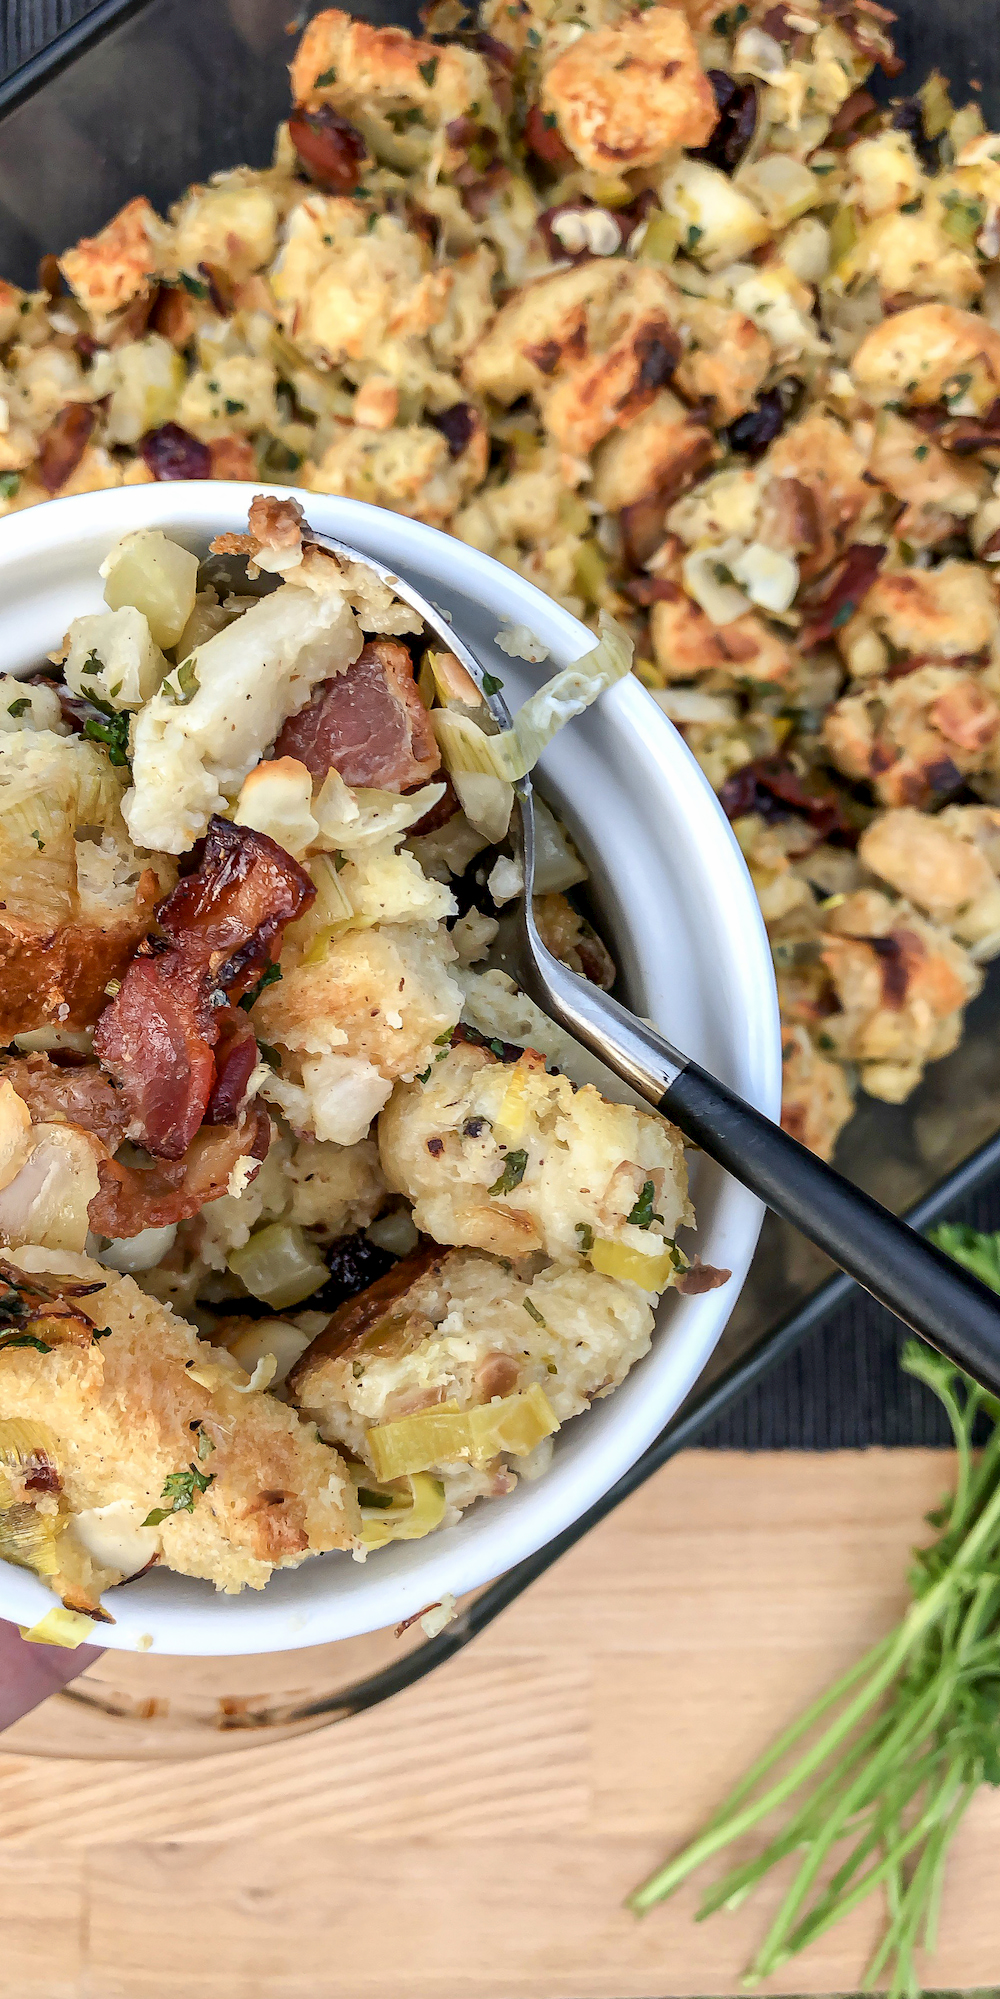 Bacon and Sourdough Stuffing Recipe with Dried Cranberries and Pear